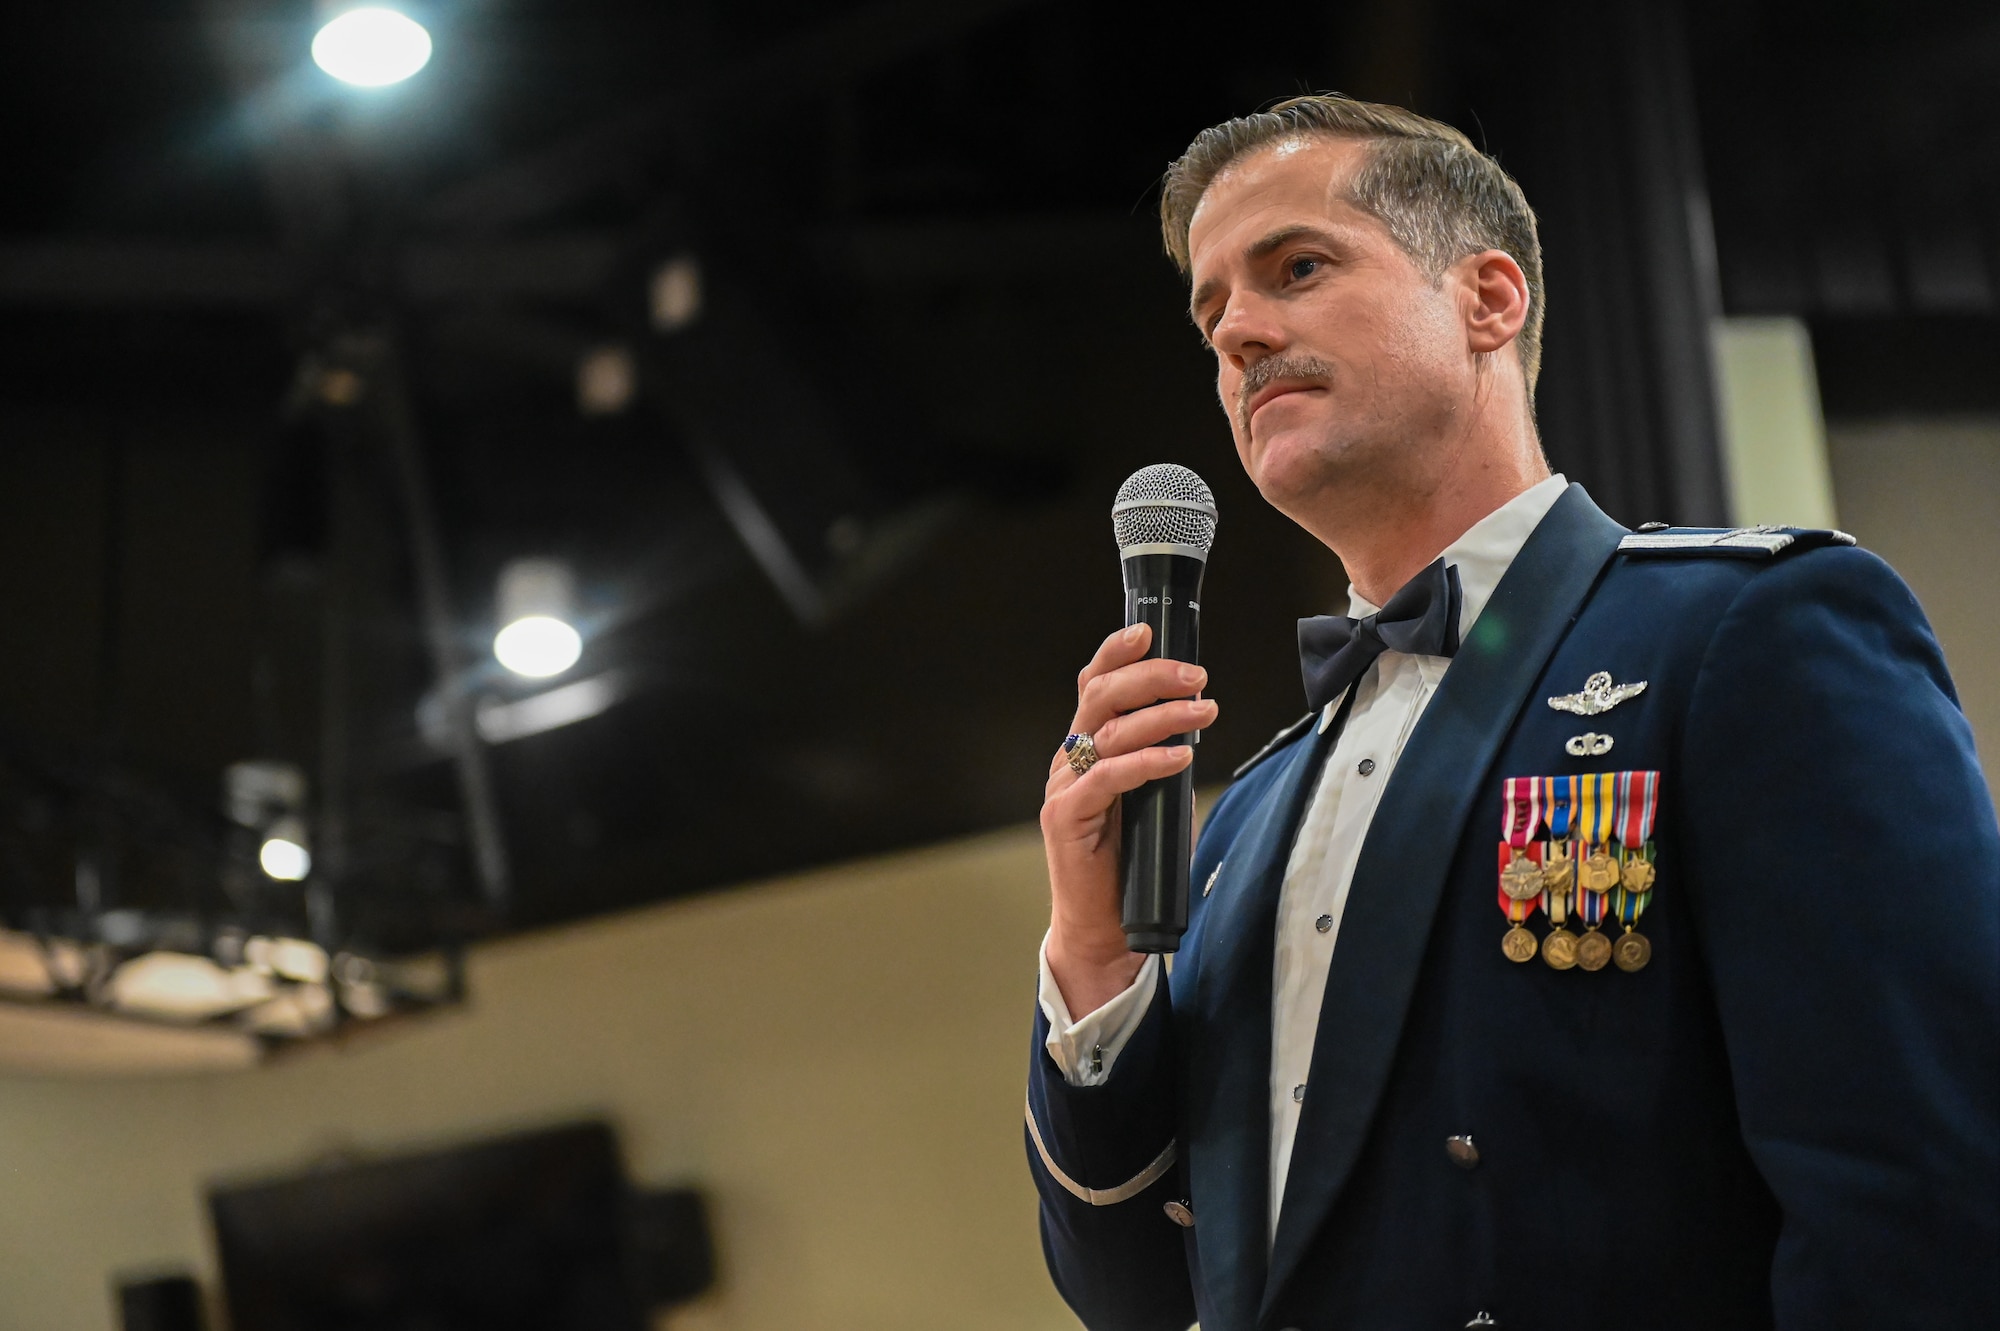 U.S Air Force Col. Joshua Wood, 51st Fighter Wing commander, speaks during a Chief Recognition Ceremony at Osan Air Base, Republic of Korea, March 17, 2023.